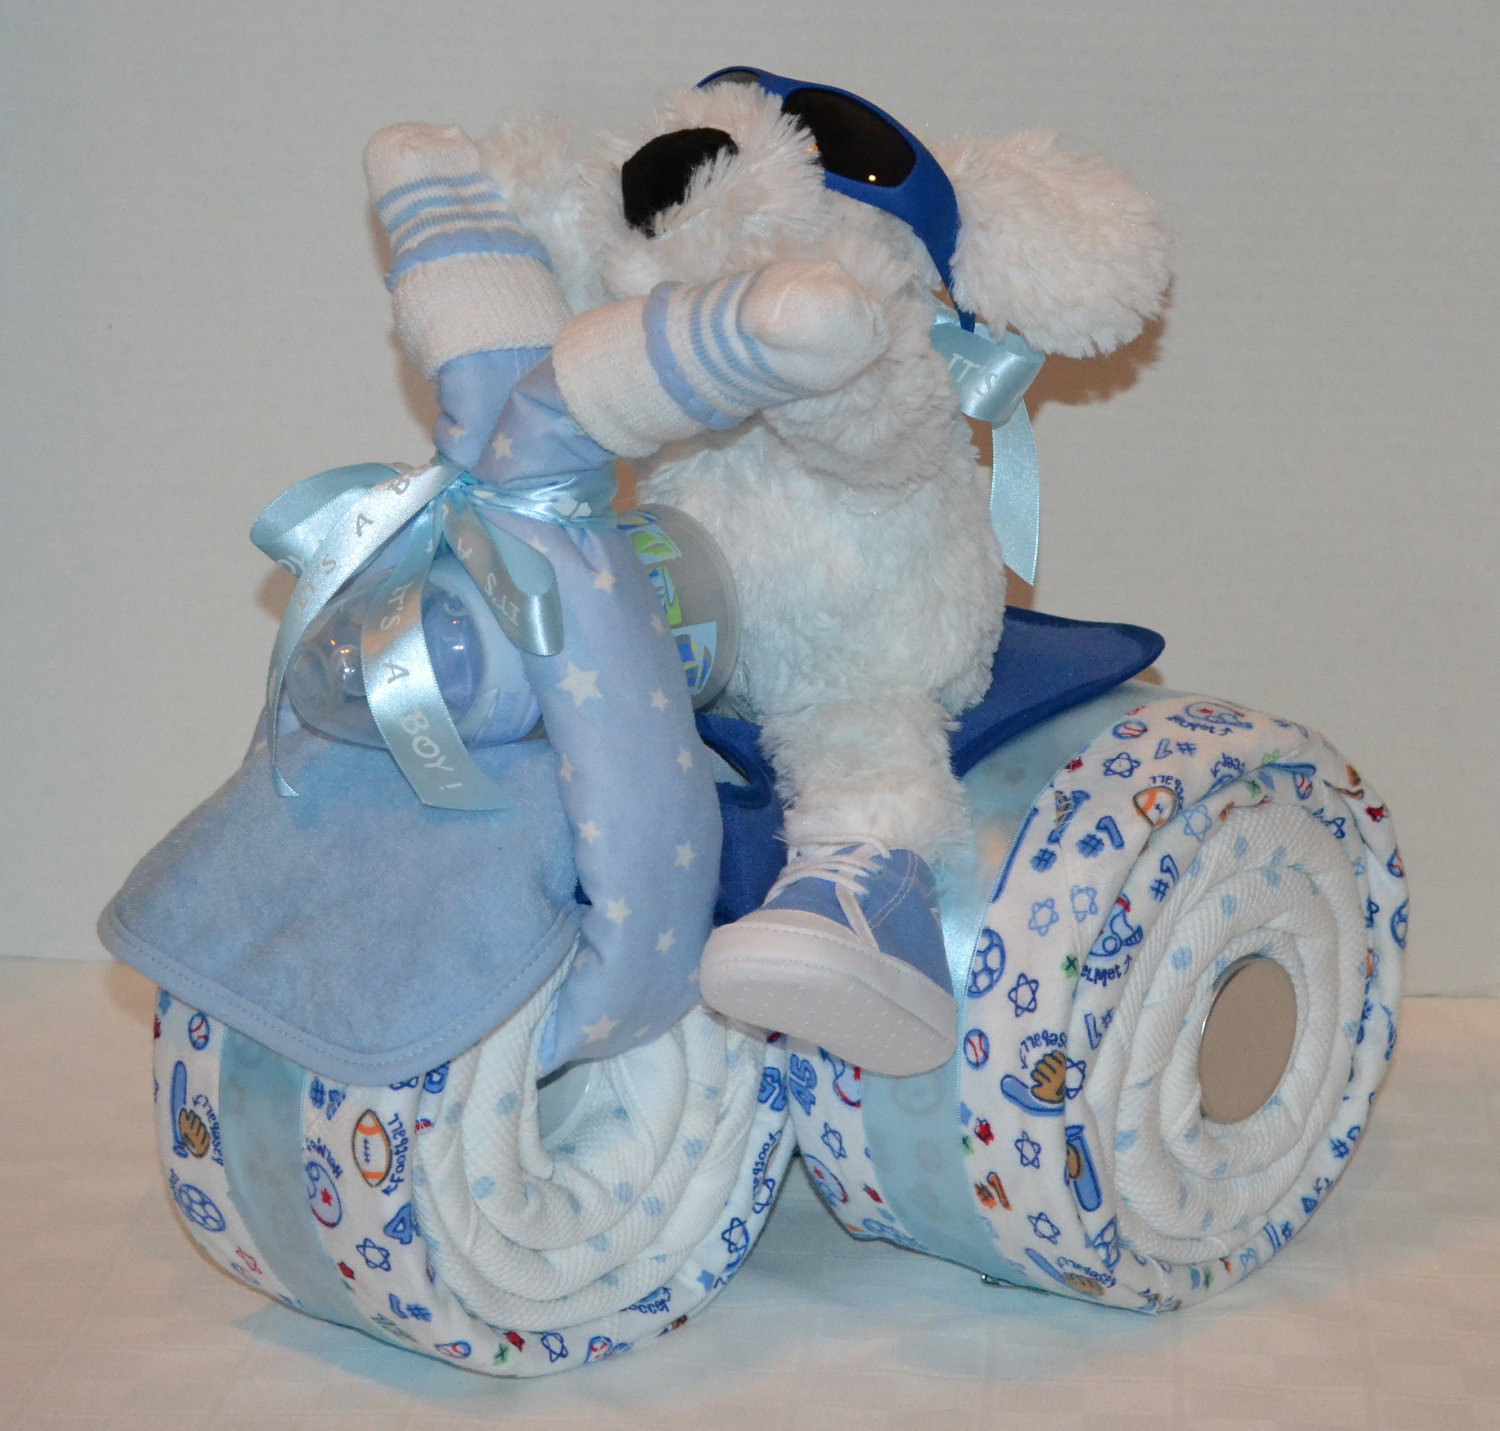 Baby Shower Ideas Gift
 Tricycle Trike Diaper Cake Baby Shower Gift Sports theme